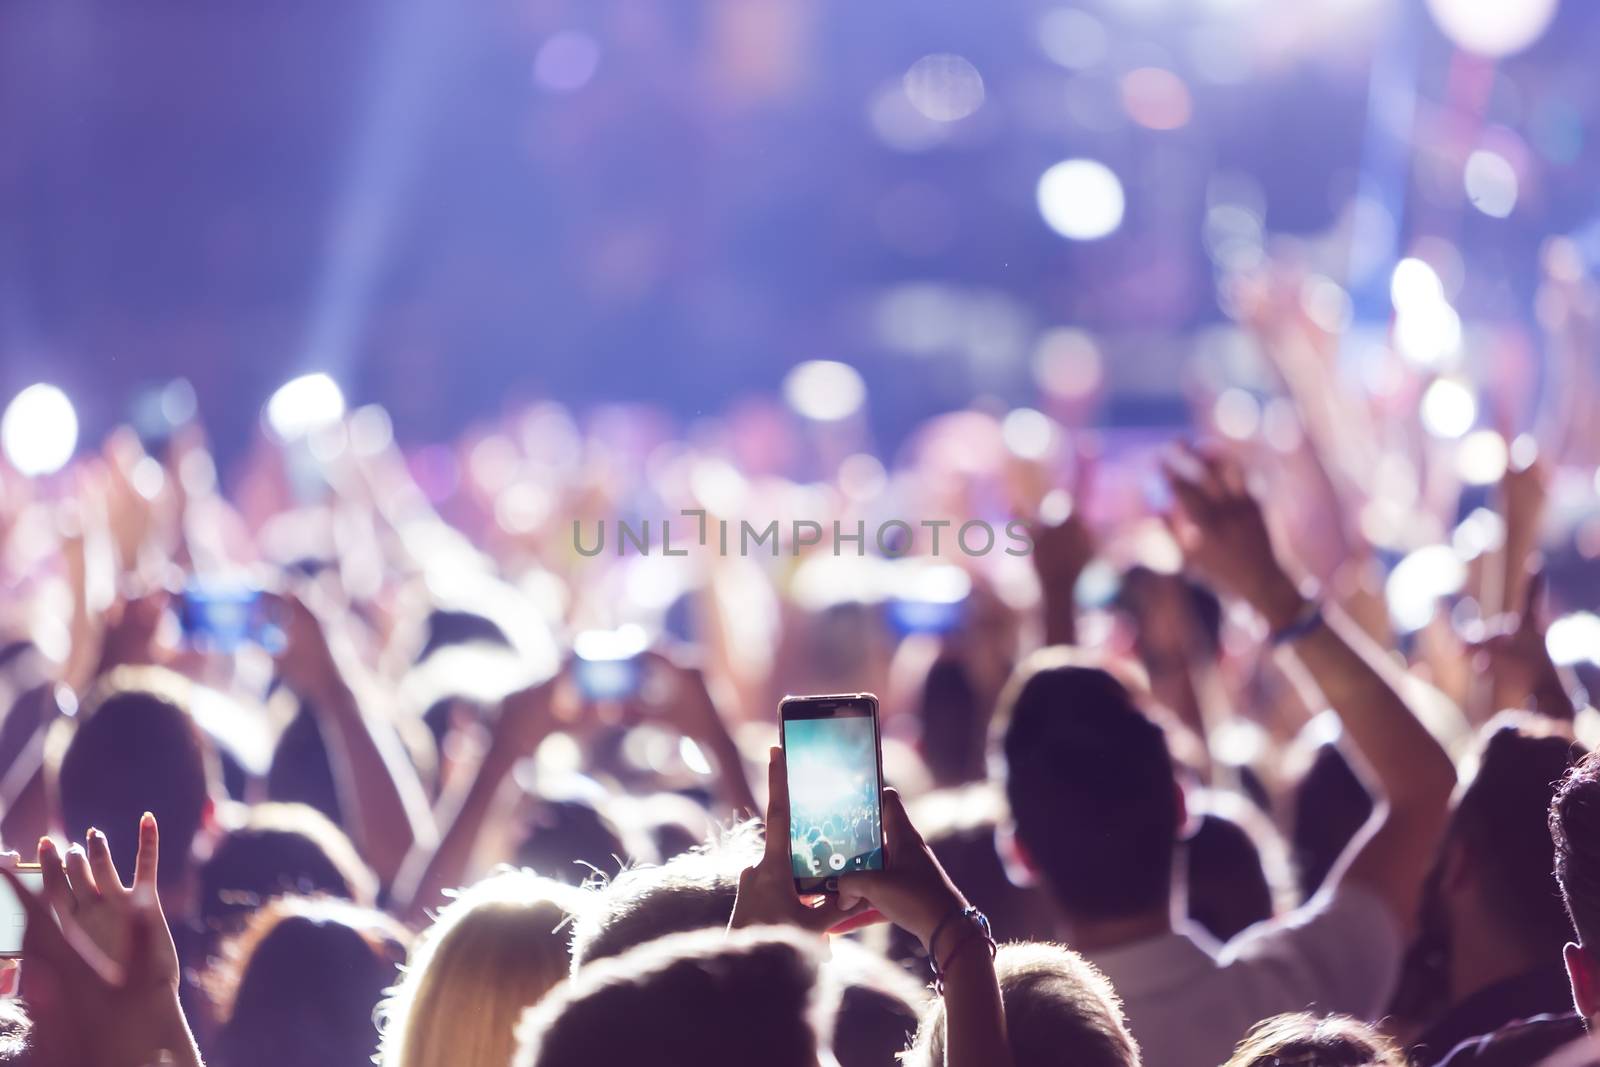 Thessaloniki, Greece - September 11, 2016: Hand with a smartphone records live music festival, Taking photo of concert stage, live concert, music festival, happy youth, luxury party, landscape exterior.